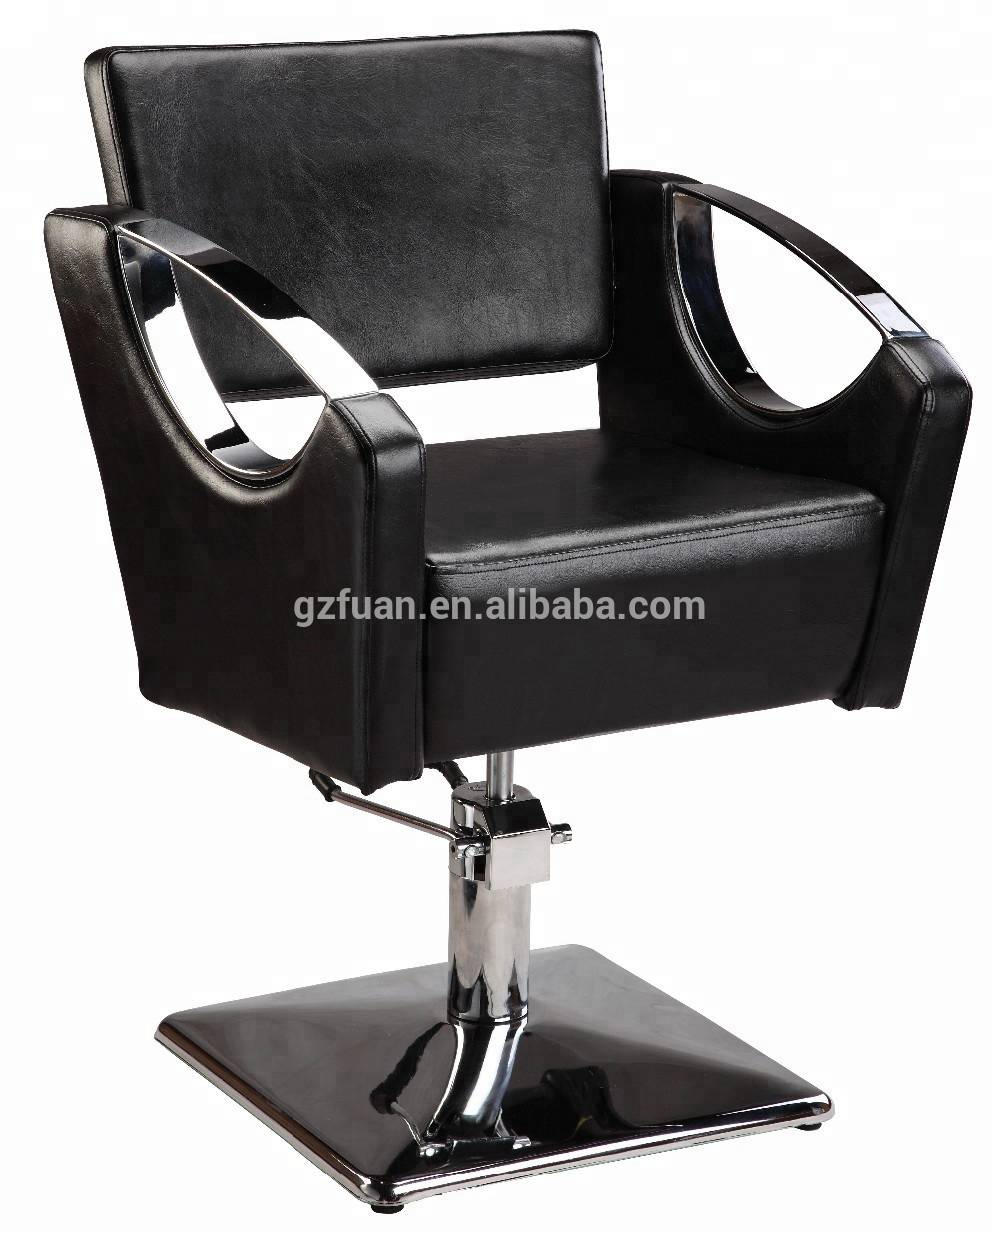 Hot sale synthetic leather hairdresser salon furniture cheap barber chair hair salon styling chair